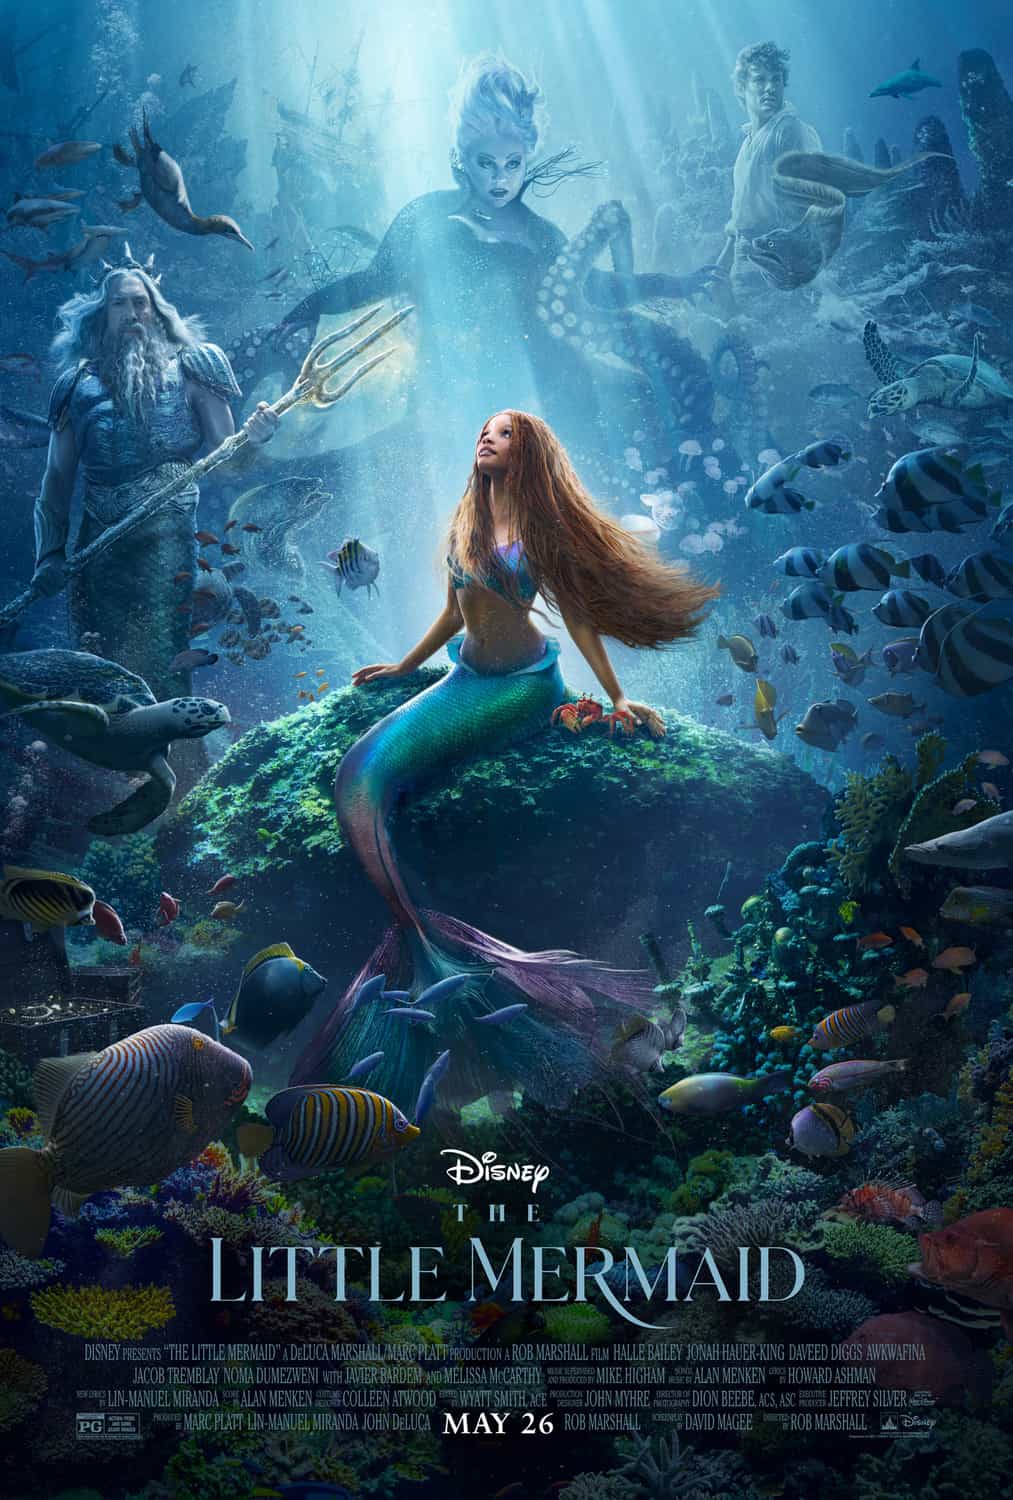 Check out the new teaser trailer for upcoming movie The Little Mermaid which stars Halle Bailey and Jonah Hauer-King - movie UK release date 26th May 2023 #thelittlemermaid